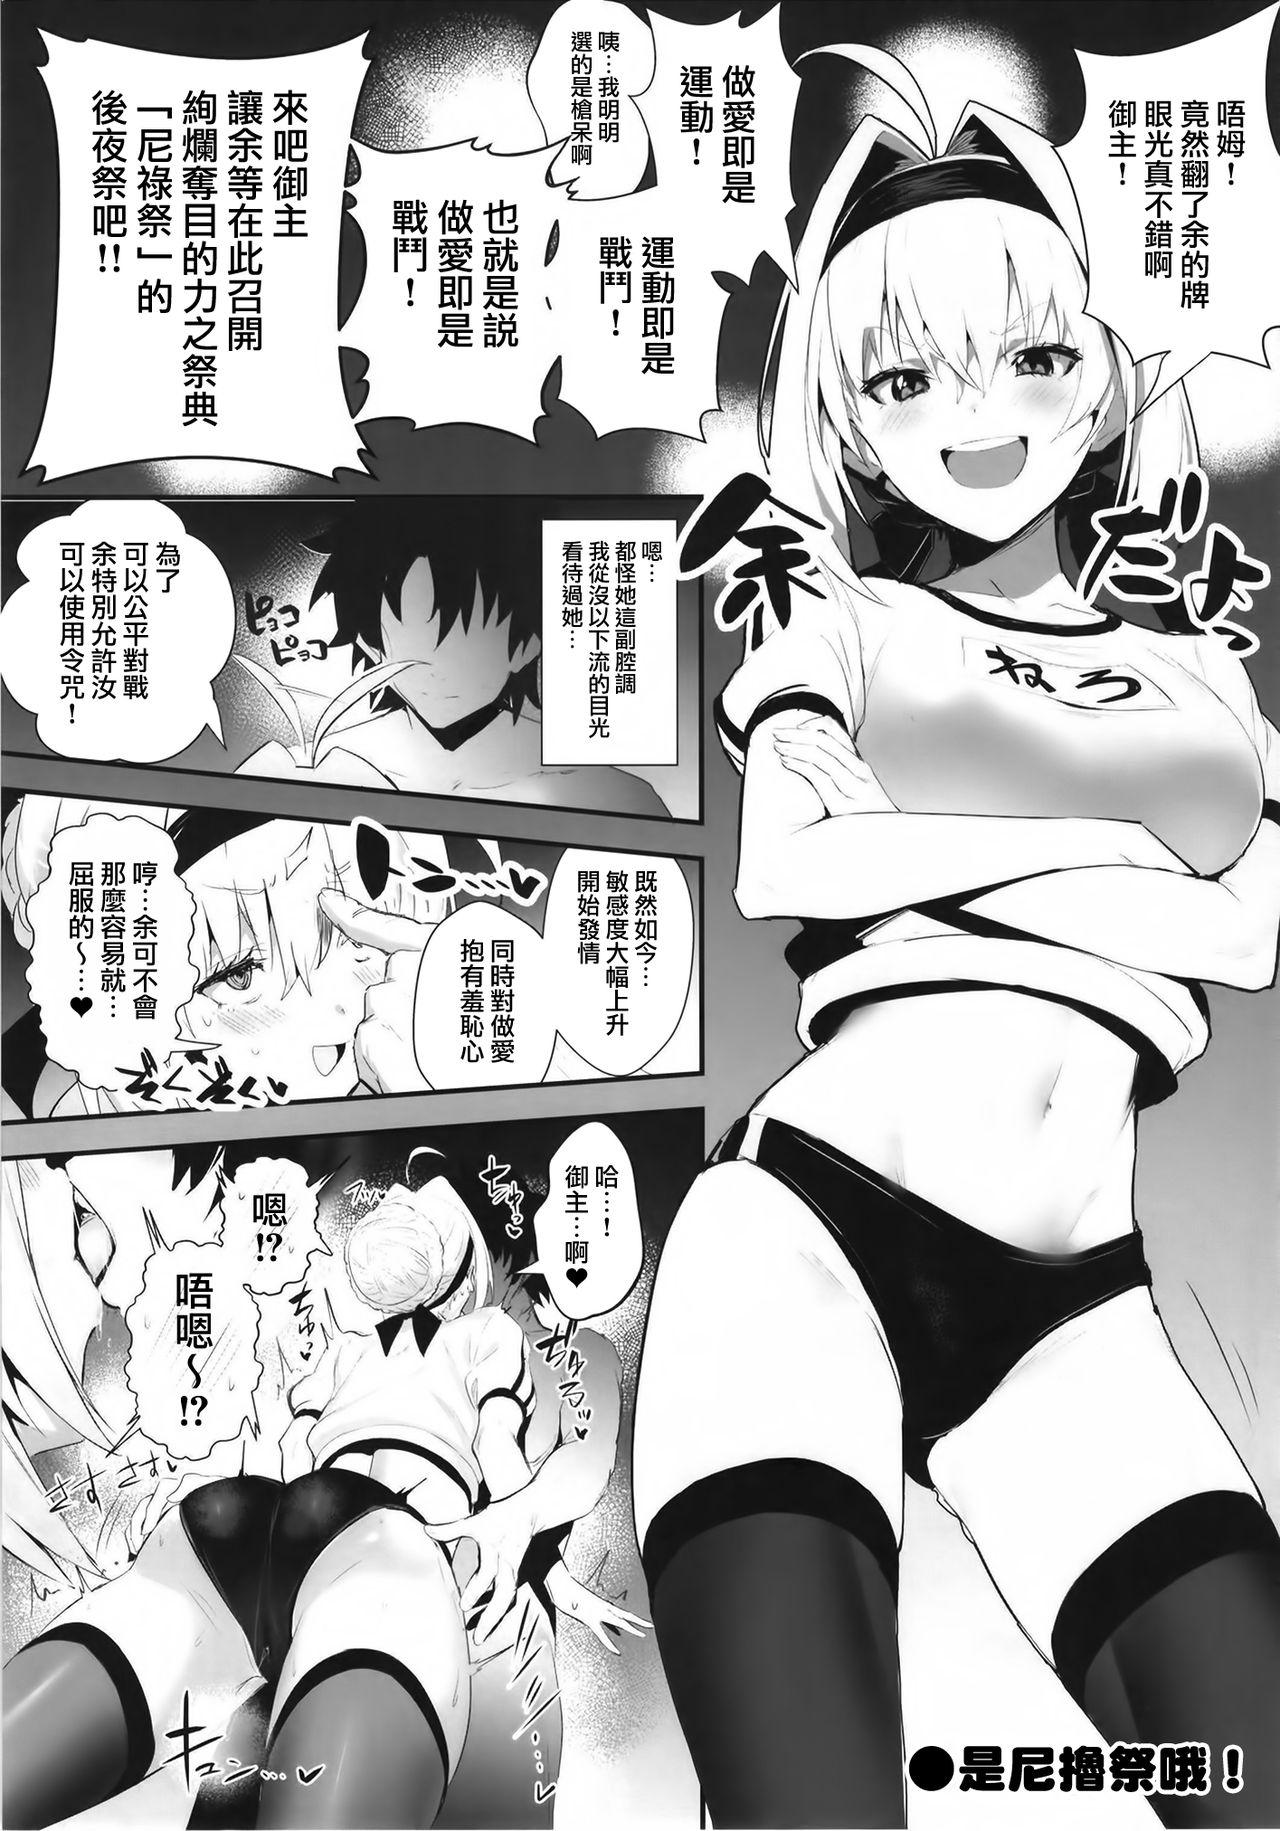 Unshaved SUKEBE Order VOL. 02 - Fate grand order Exposed - Page 11